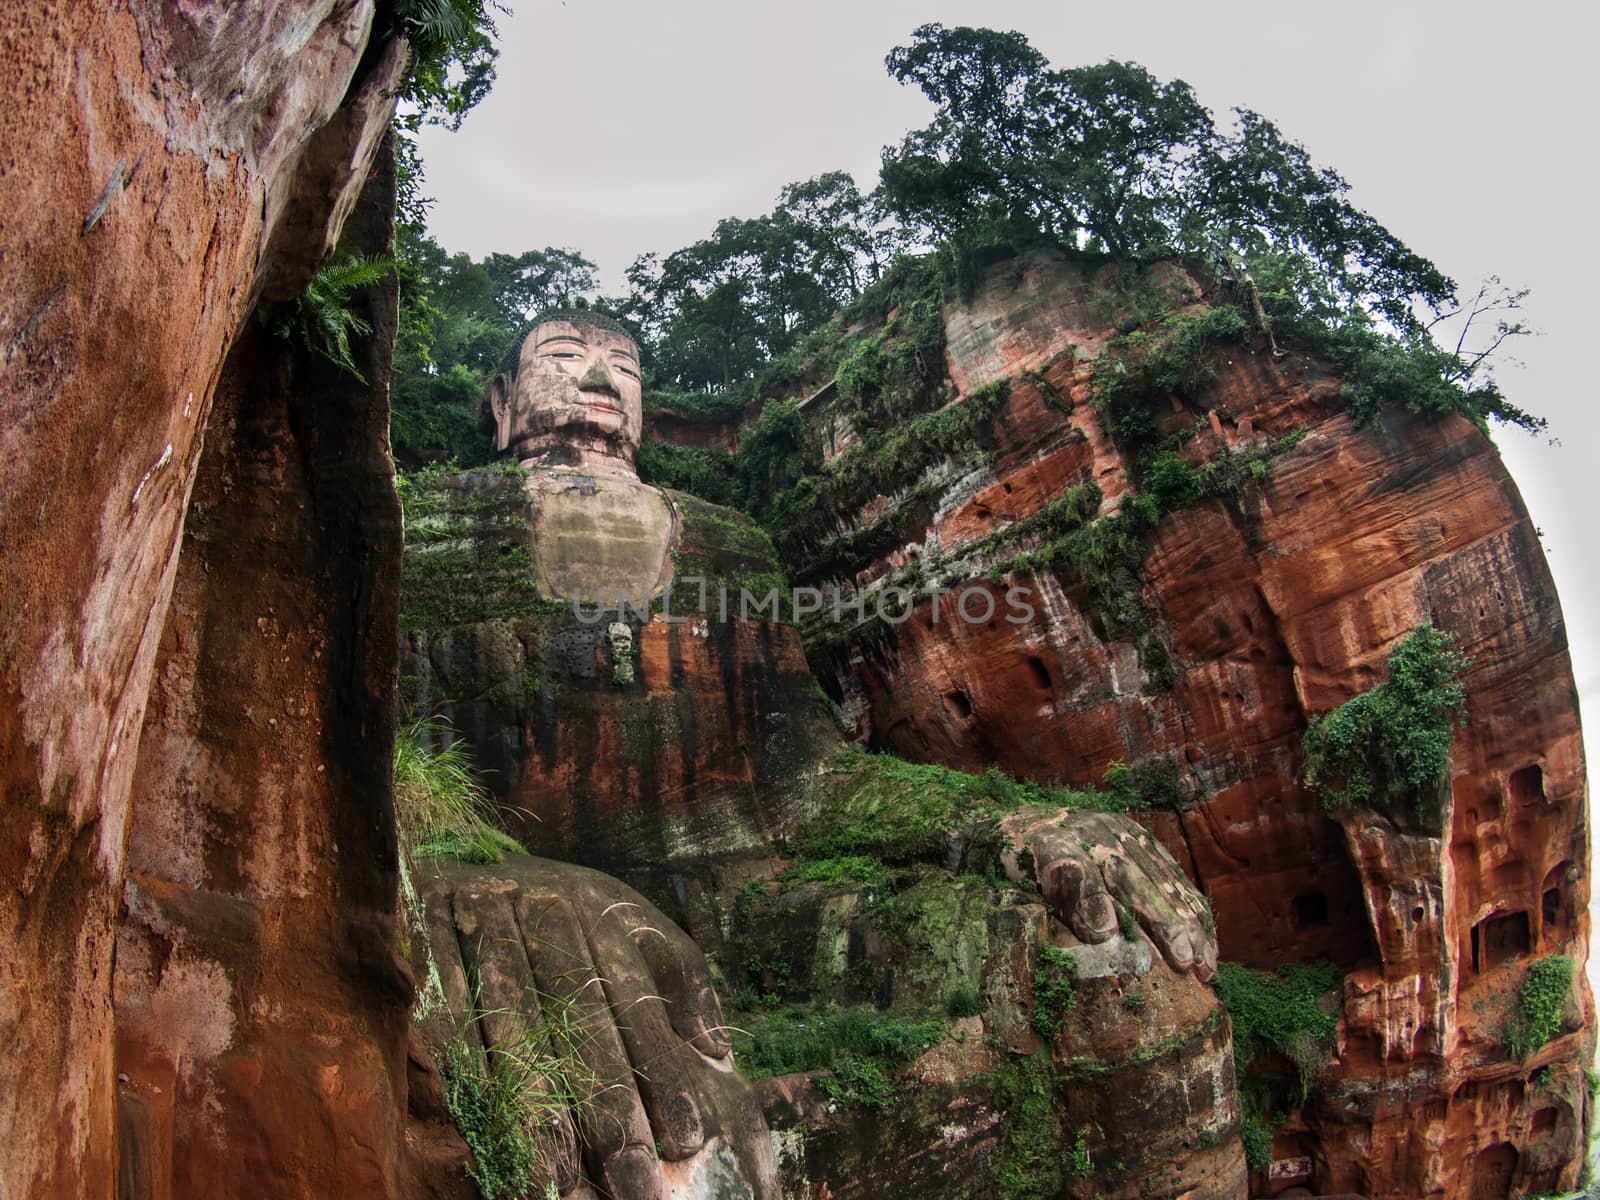 The largest Budha in the world (Leshan, Sichuan, China)